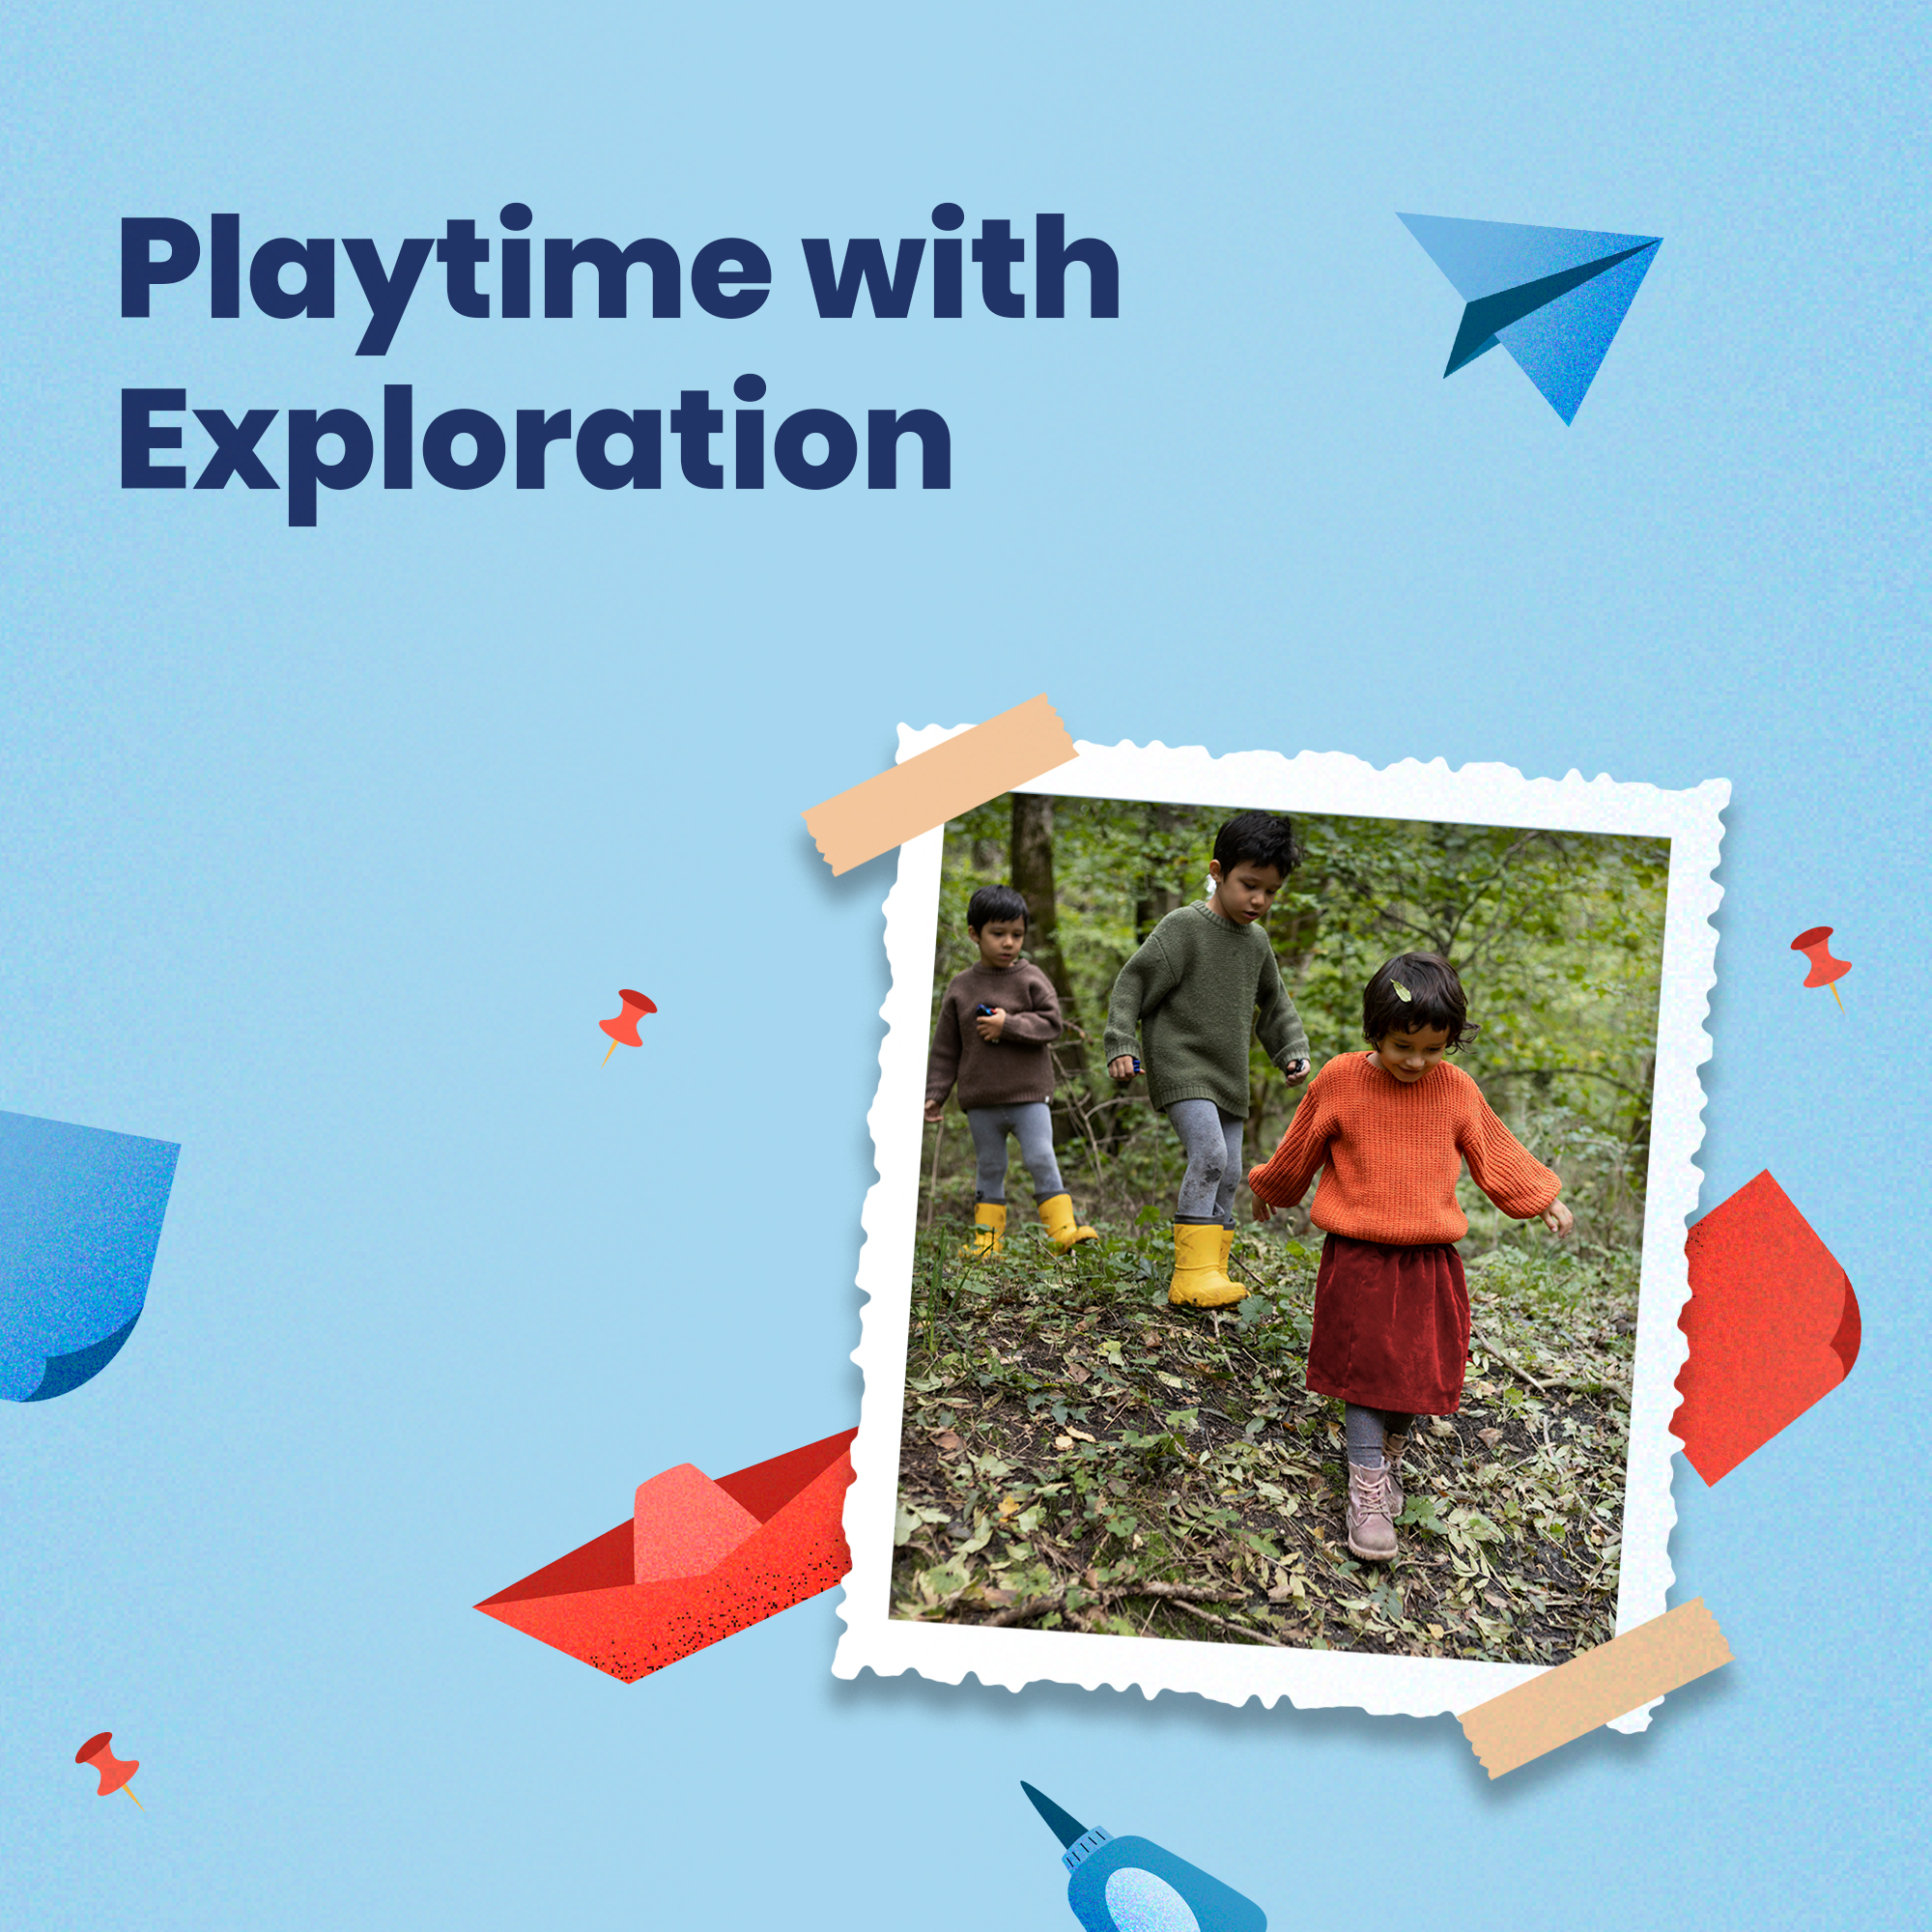 Playtime with Exploration - Sherwood high Blog